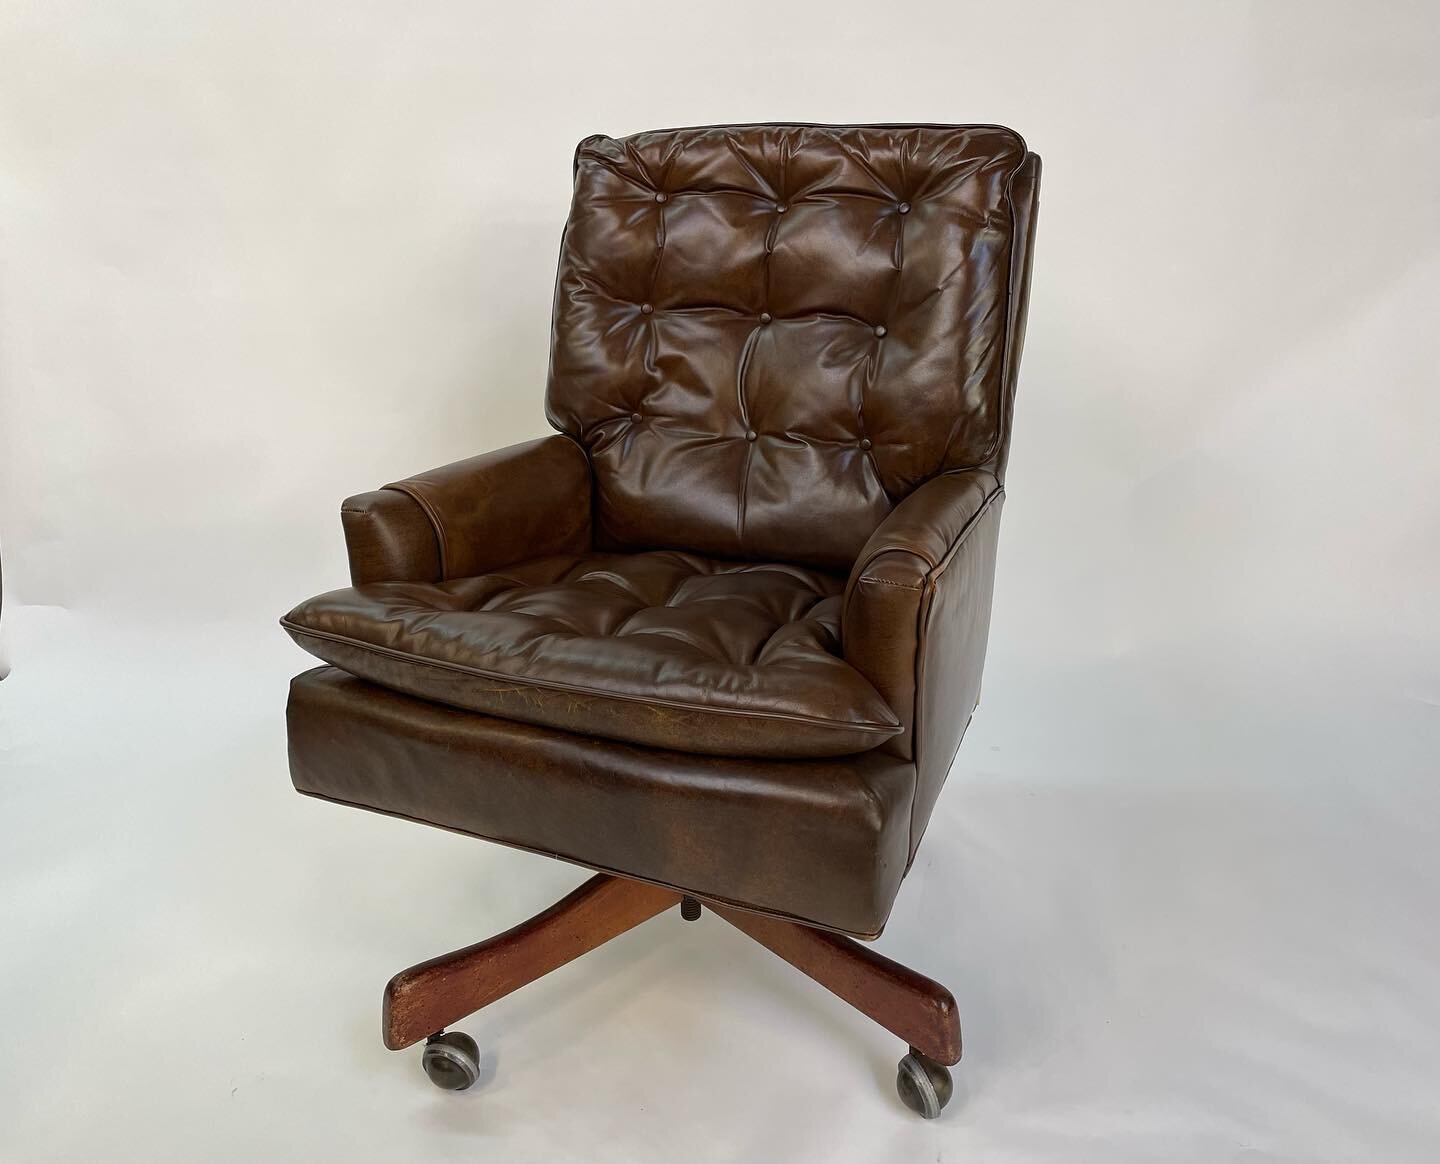 &ldquo;Energy and persistence conquer all things.&rdquo;
~Ben Franklin

This little office chair might not look like much , but its one of our favorite clients most prized pieces of furniture. We have diligently maintained this office chair off and o